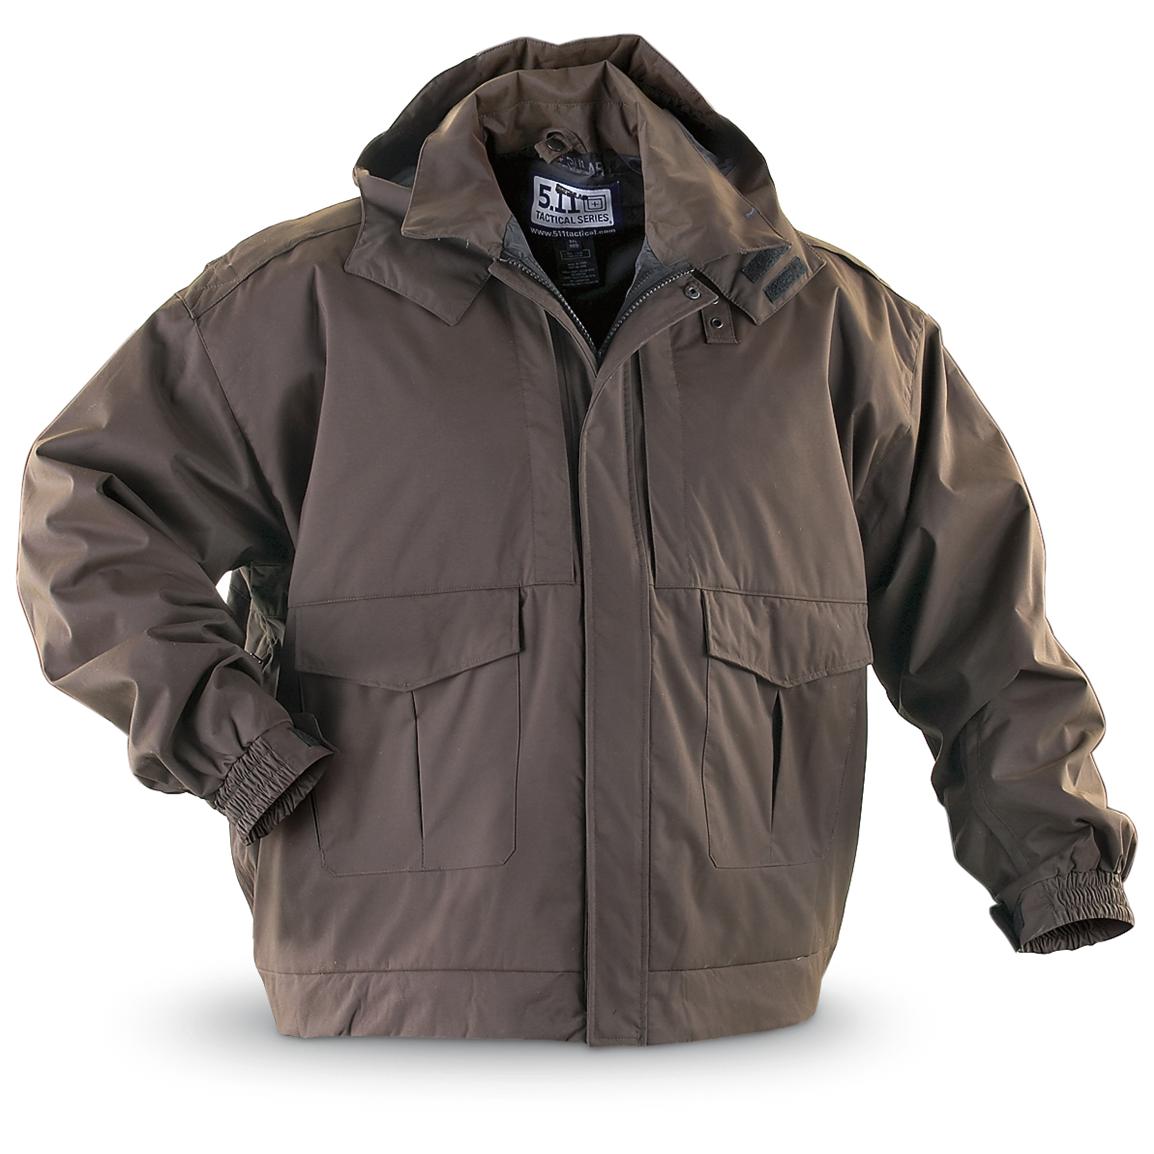 5.11 Tactical® Specialist Patrol Jacket, Long, Brown with BONUS Safety ...